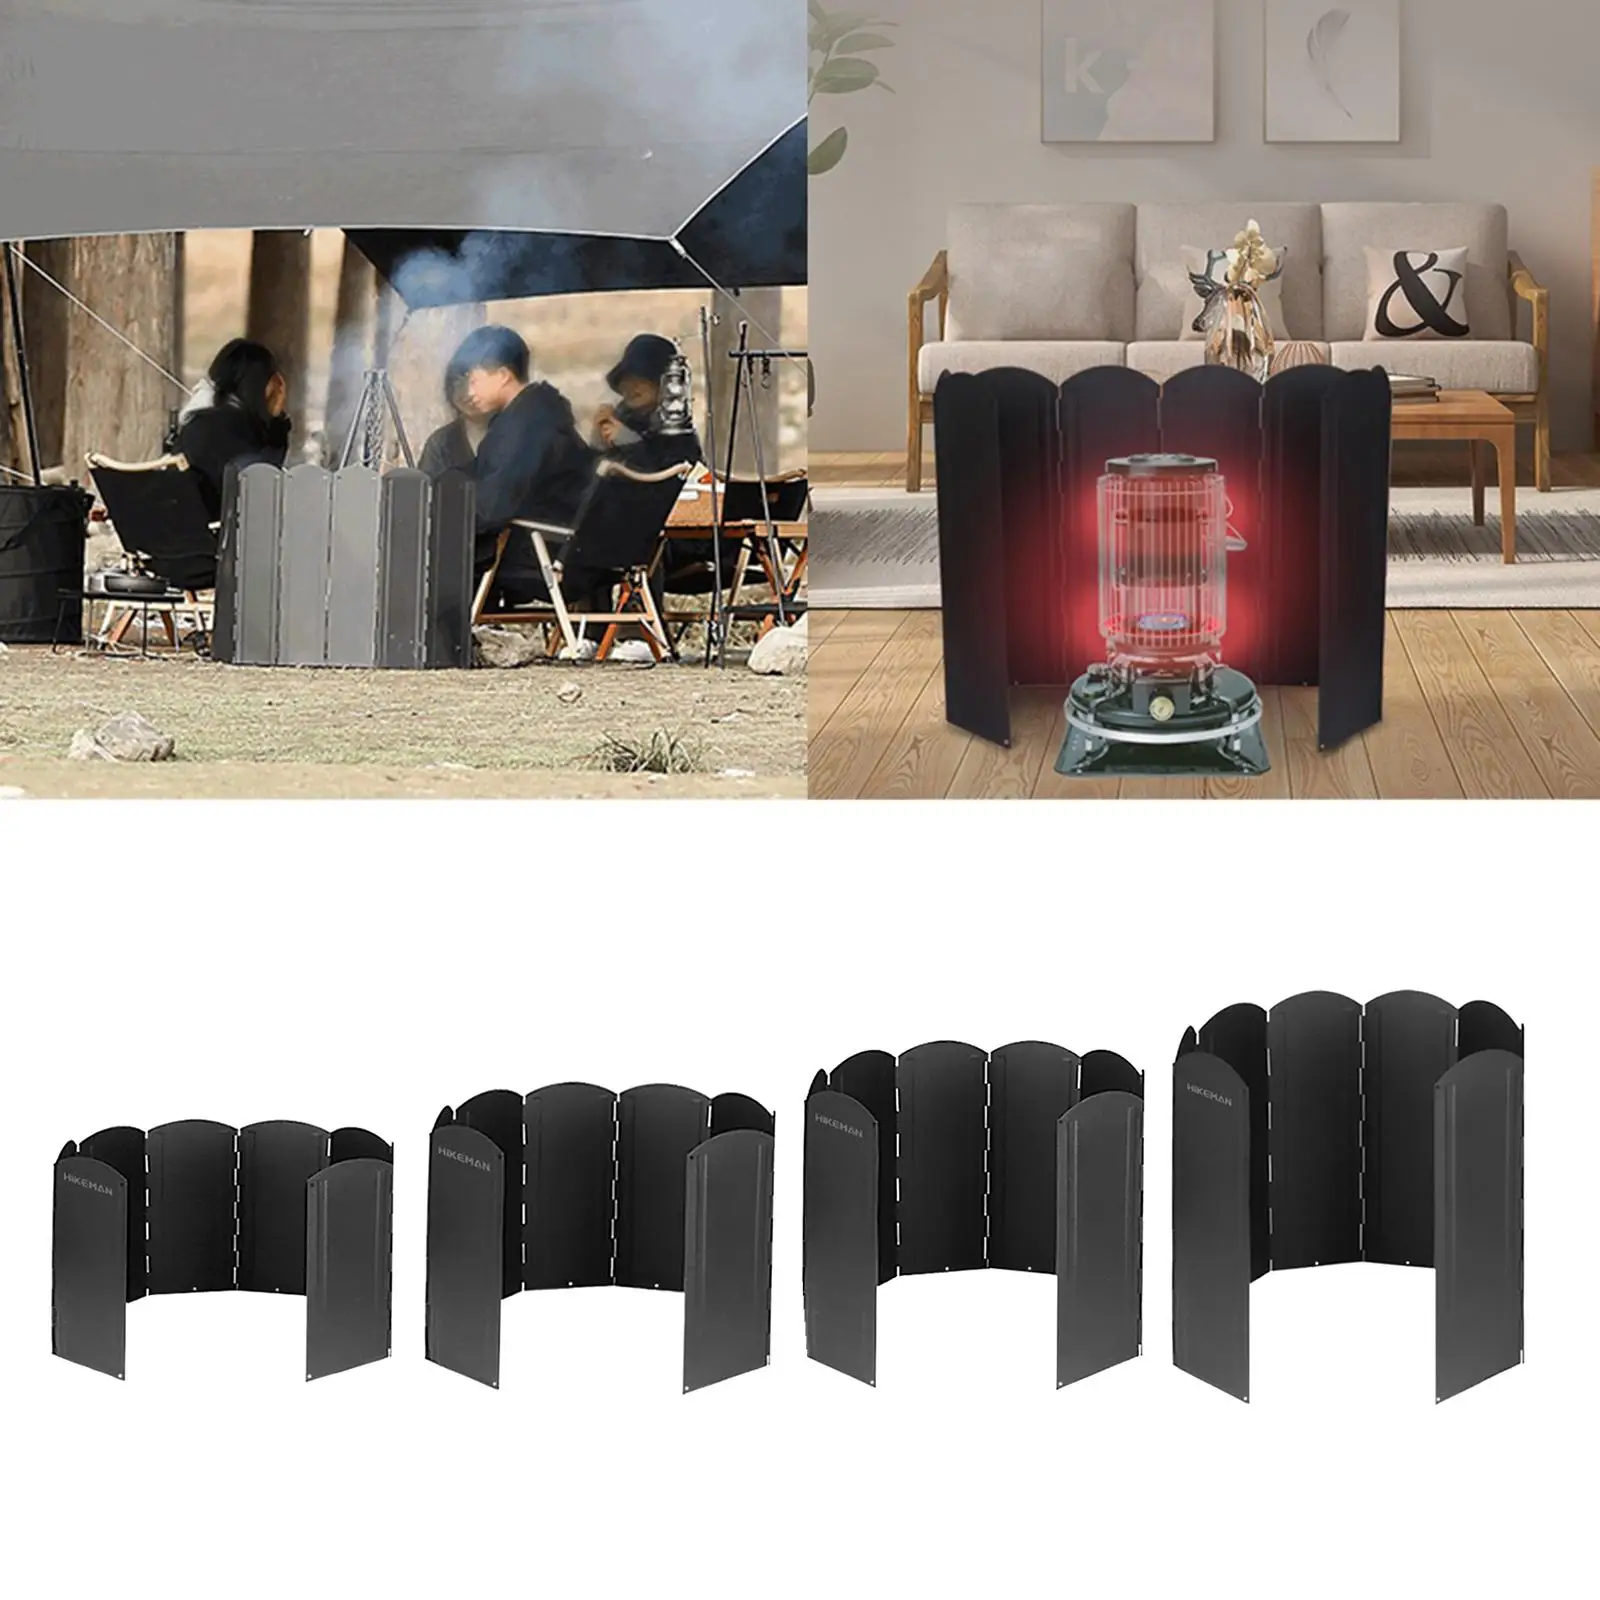 Outdoor Camping Stove Windshield 8 Plates Foldable Outdoor Wind Screen Gas Stove Wind Shield for BBQ Picnic